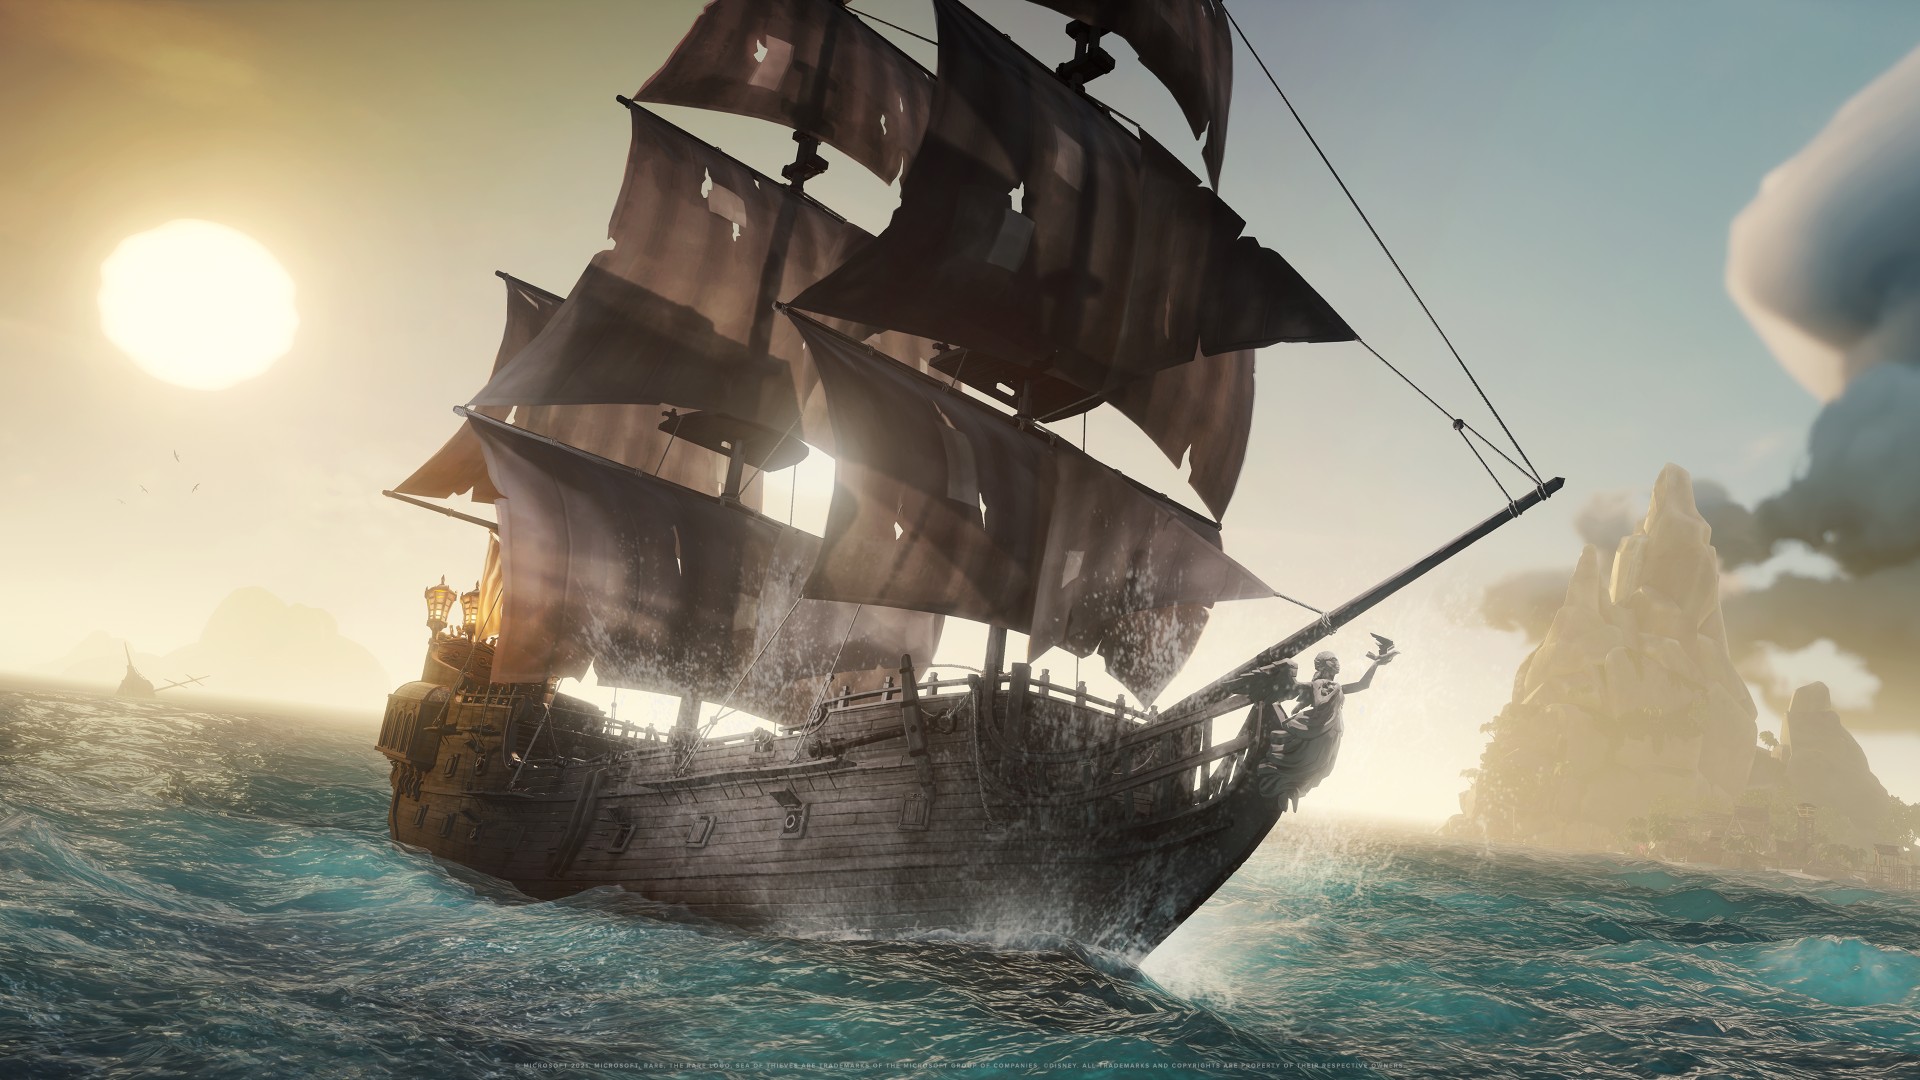 Jack Sparrow Sea of Thieves Wallpapers